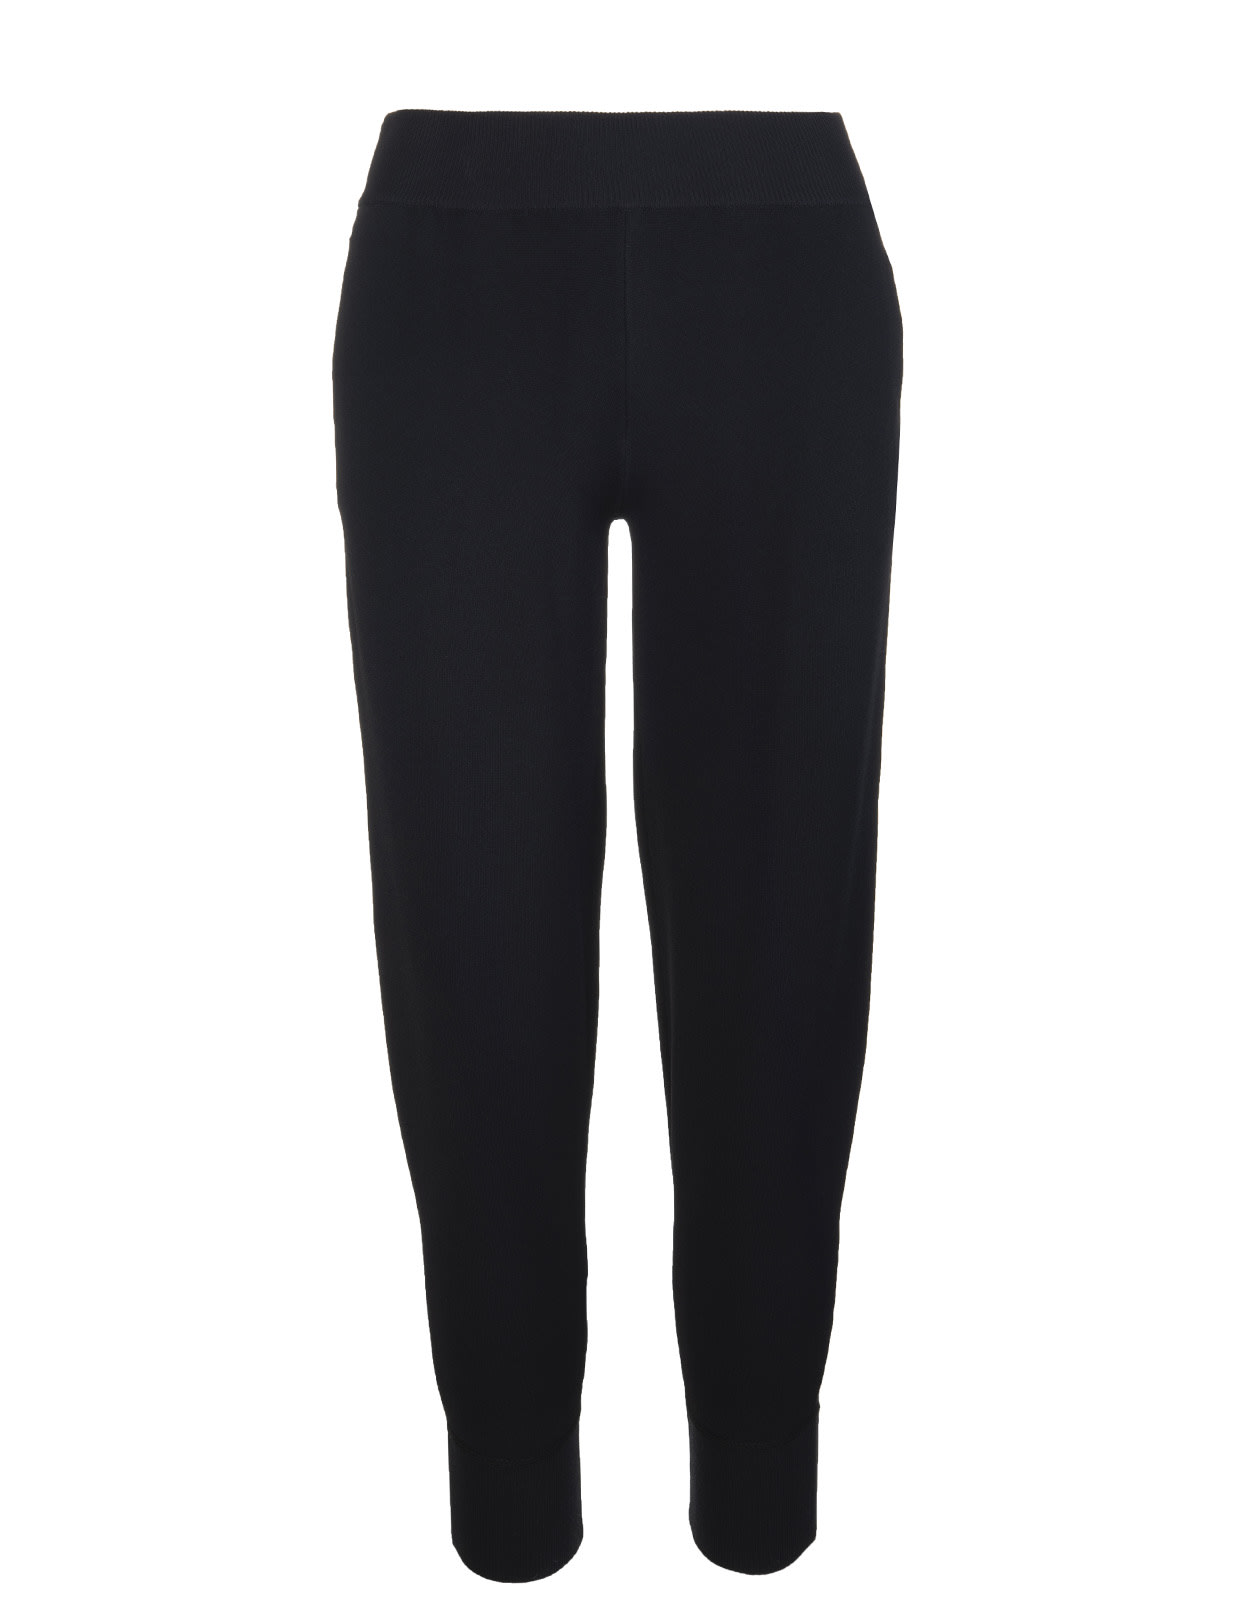 Stella McCartney Woman Black Compact Knitted Trousers